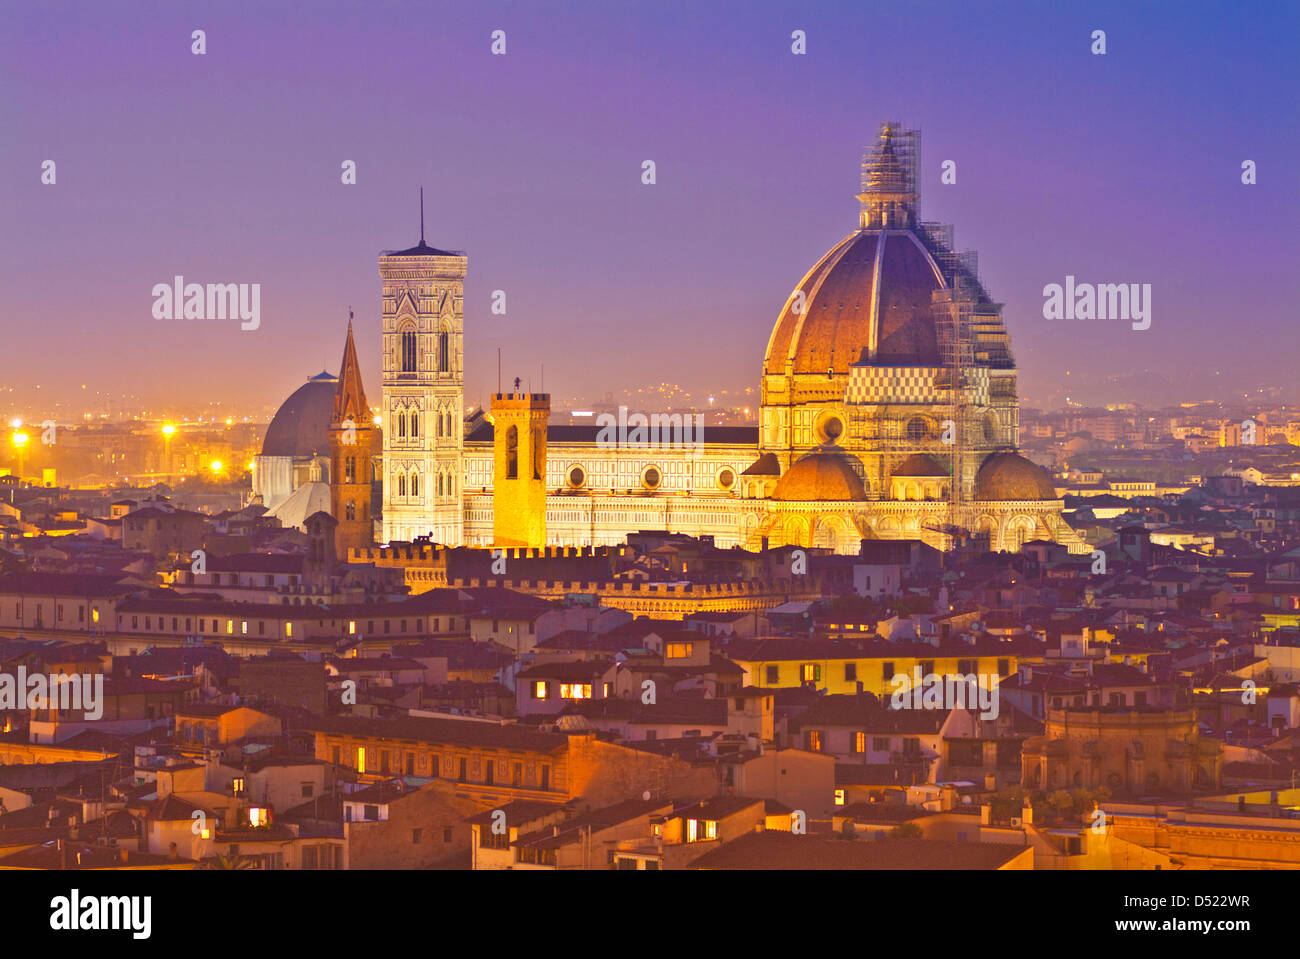 Cityscape at night Duomo Florence Italie EU Europe Firenze Banque D'Images